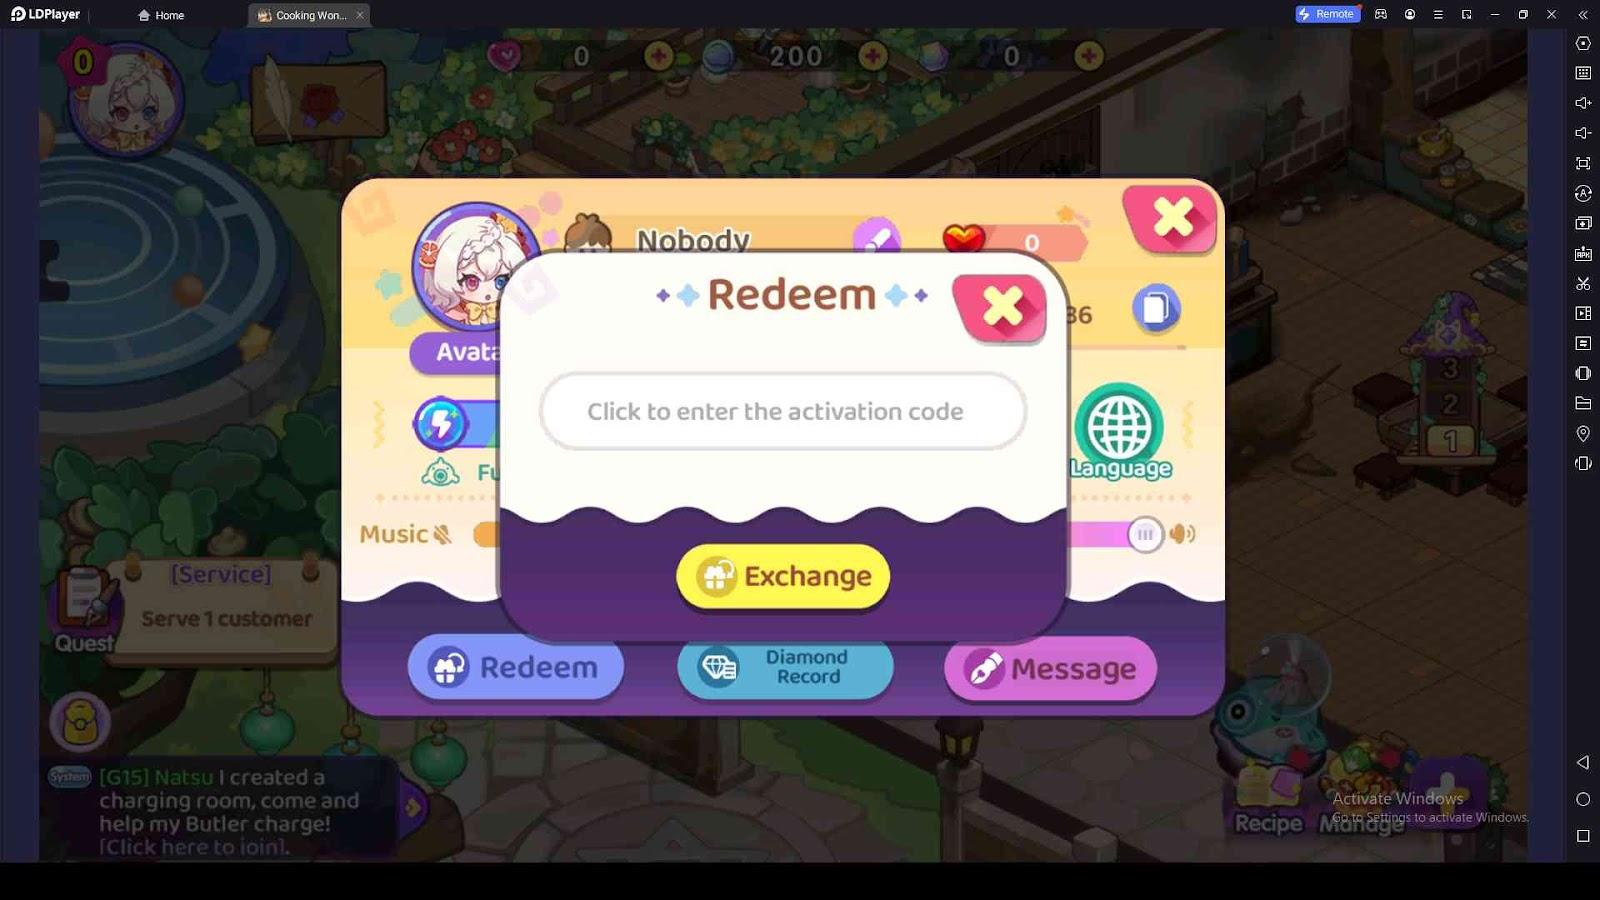 Redeeming Process for the Codes in Cooking Wonderland